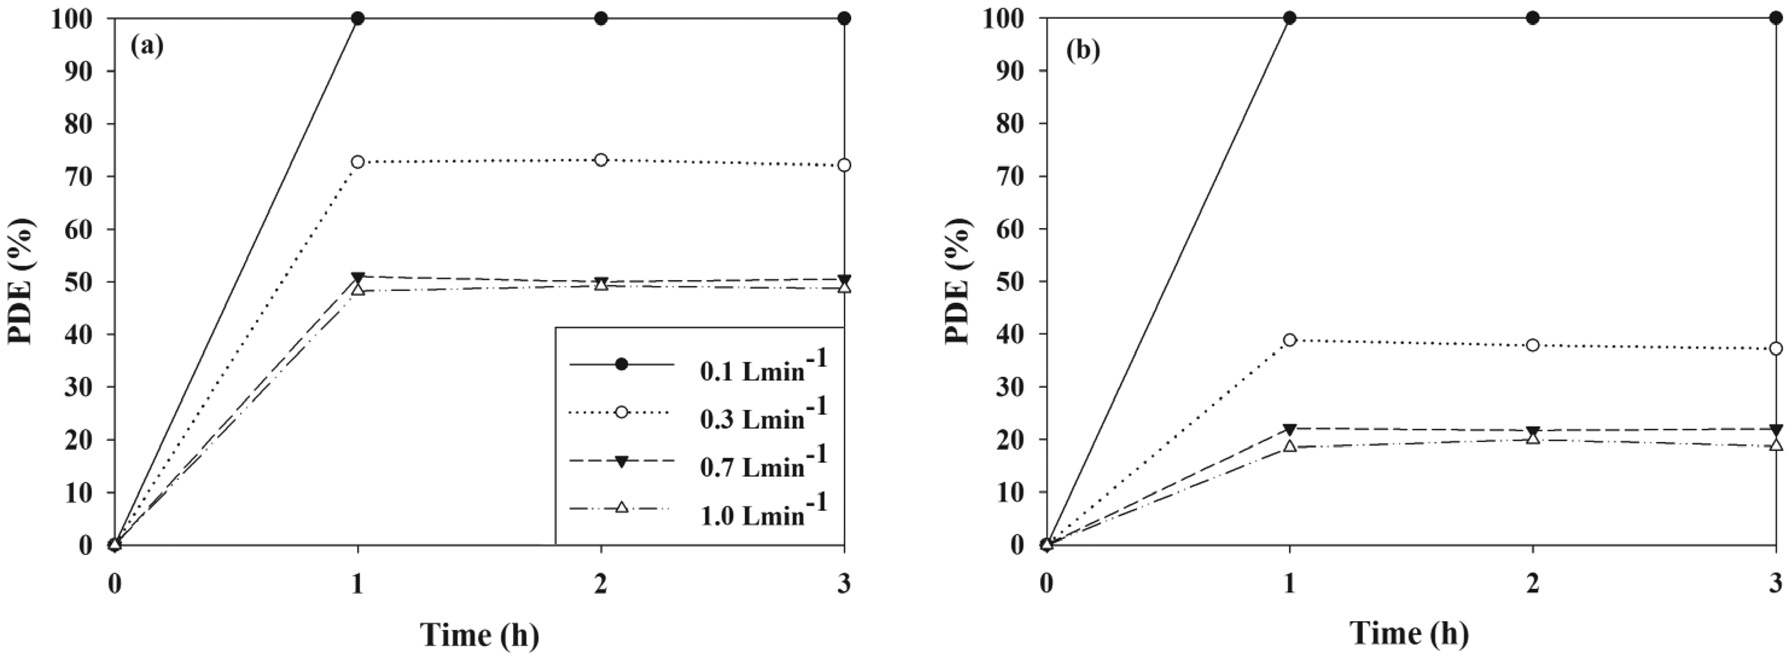 Photocatalytic degradation efficiency (PDE) of (a) TCE and (b) TTCE determined using a PANI-TiO2 composite calcined at 450 ℃ according to flow rate.